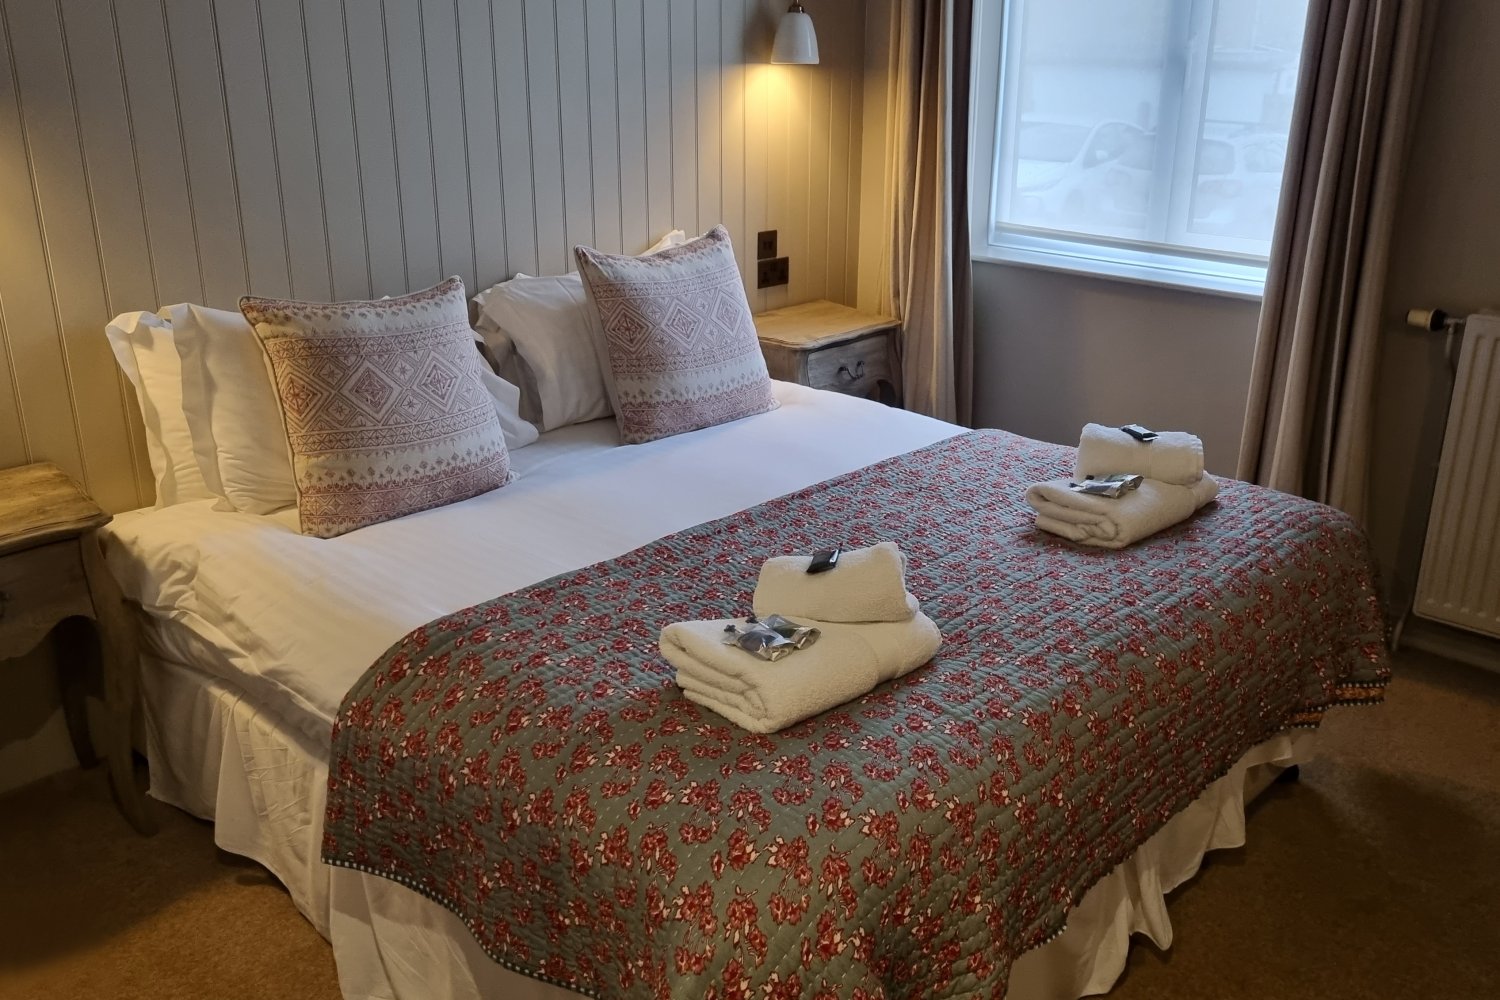 Accommodation in Tetbury | The Priory